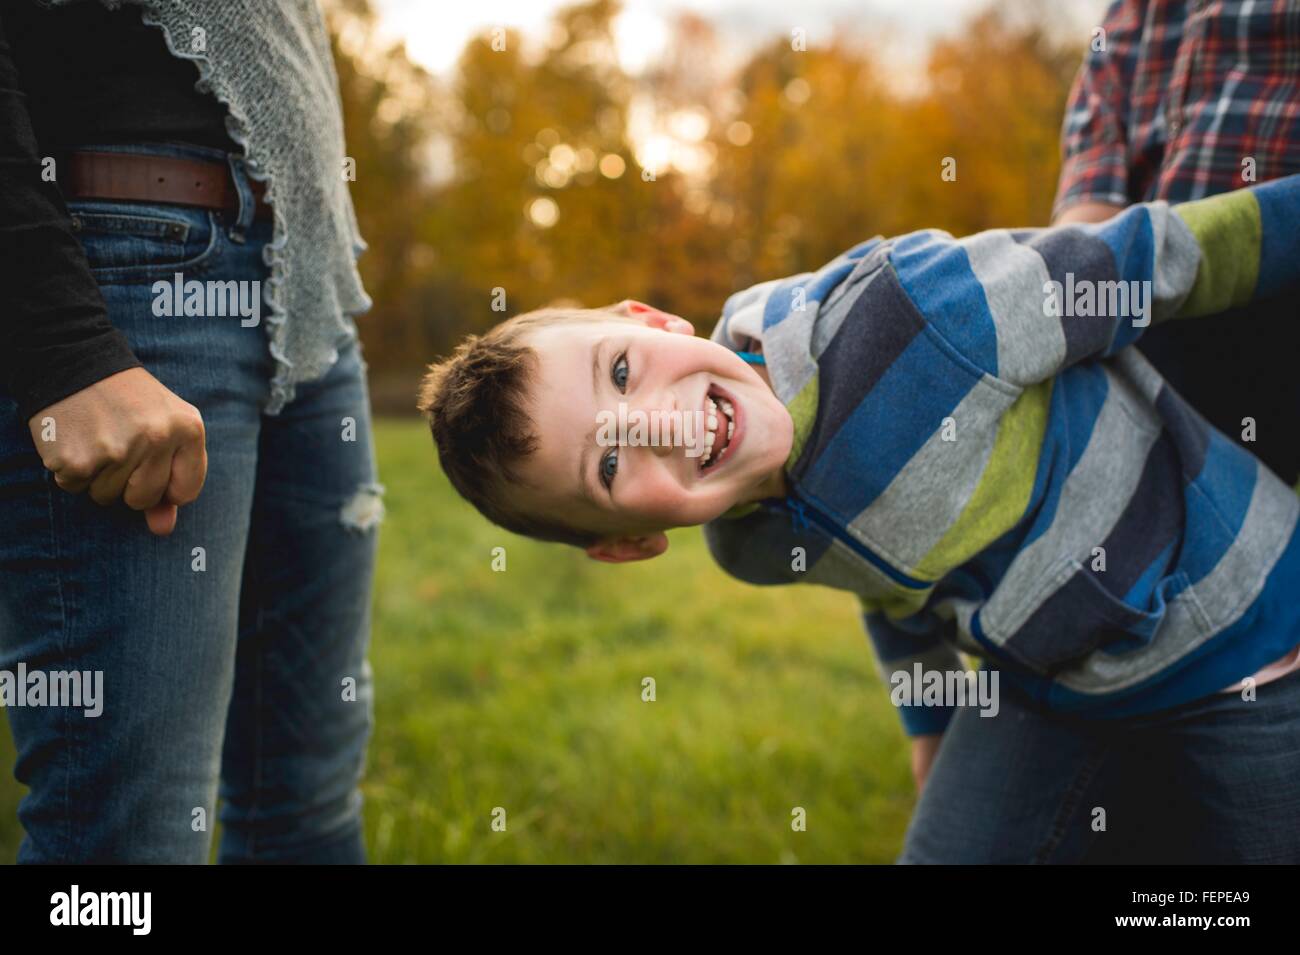 Boy with parents bending forwards looking at camera smiling Stock Photo